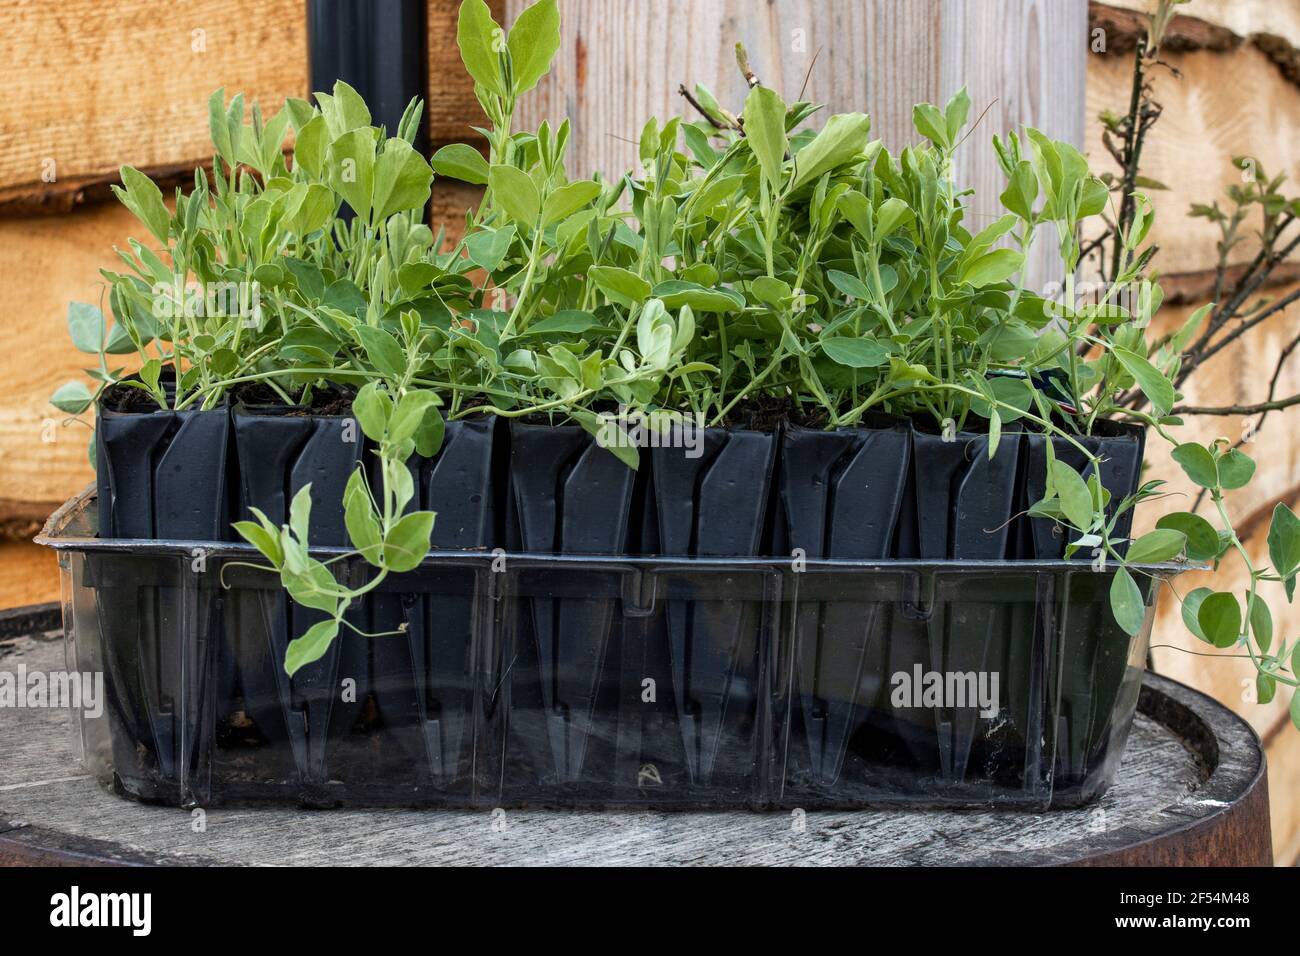 A tray of rootrainers with sweet pea seedlings growing Stock Photo